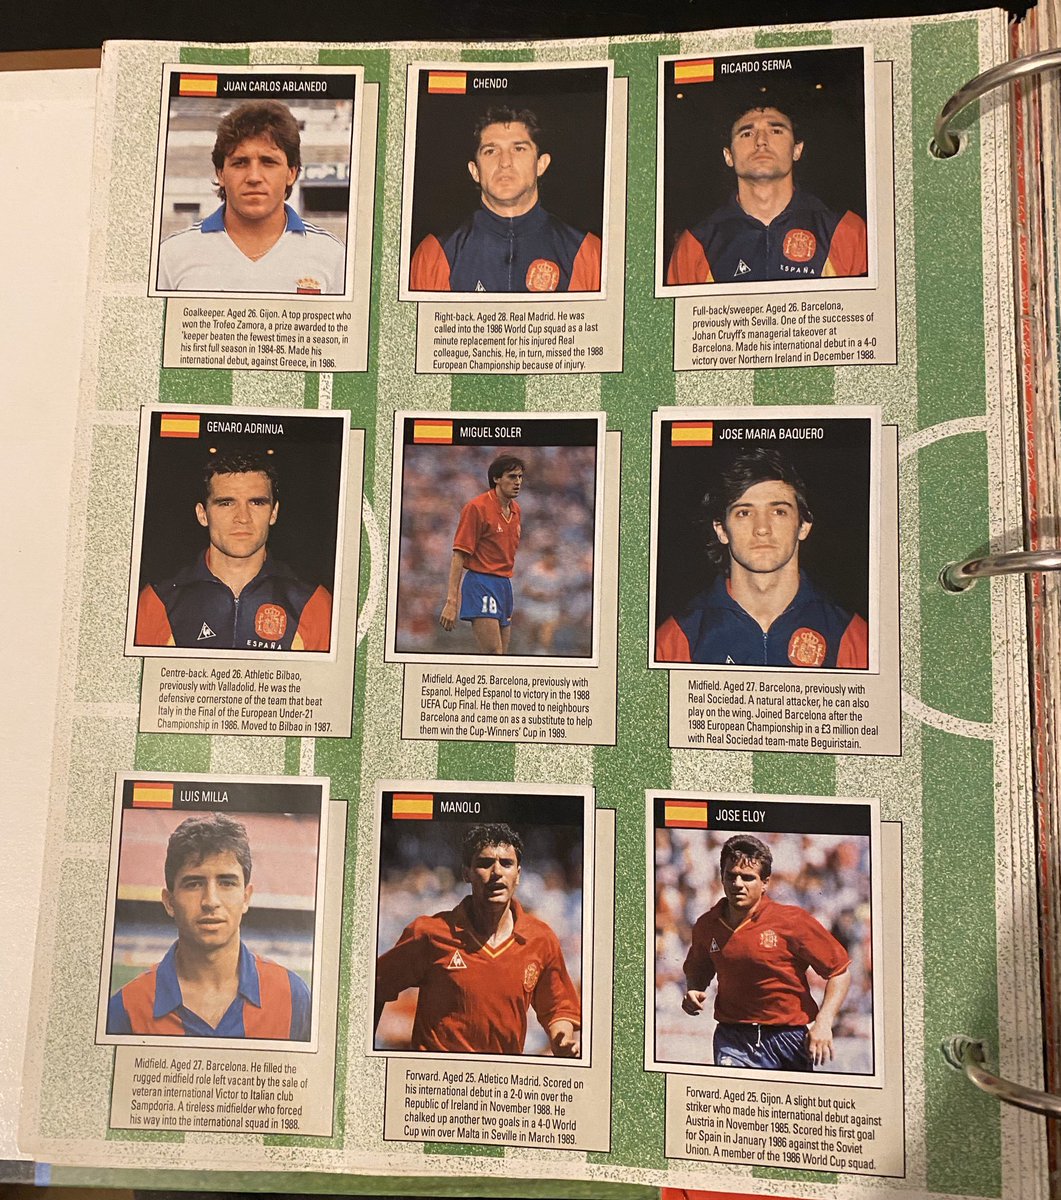 There’s a load of Spain players here who were never quite as good as you wanted them to be